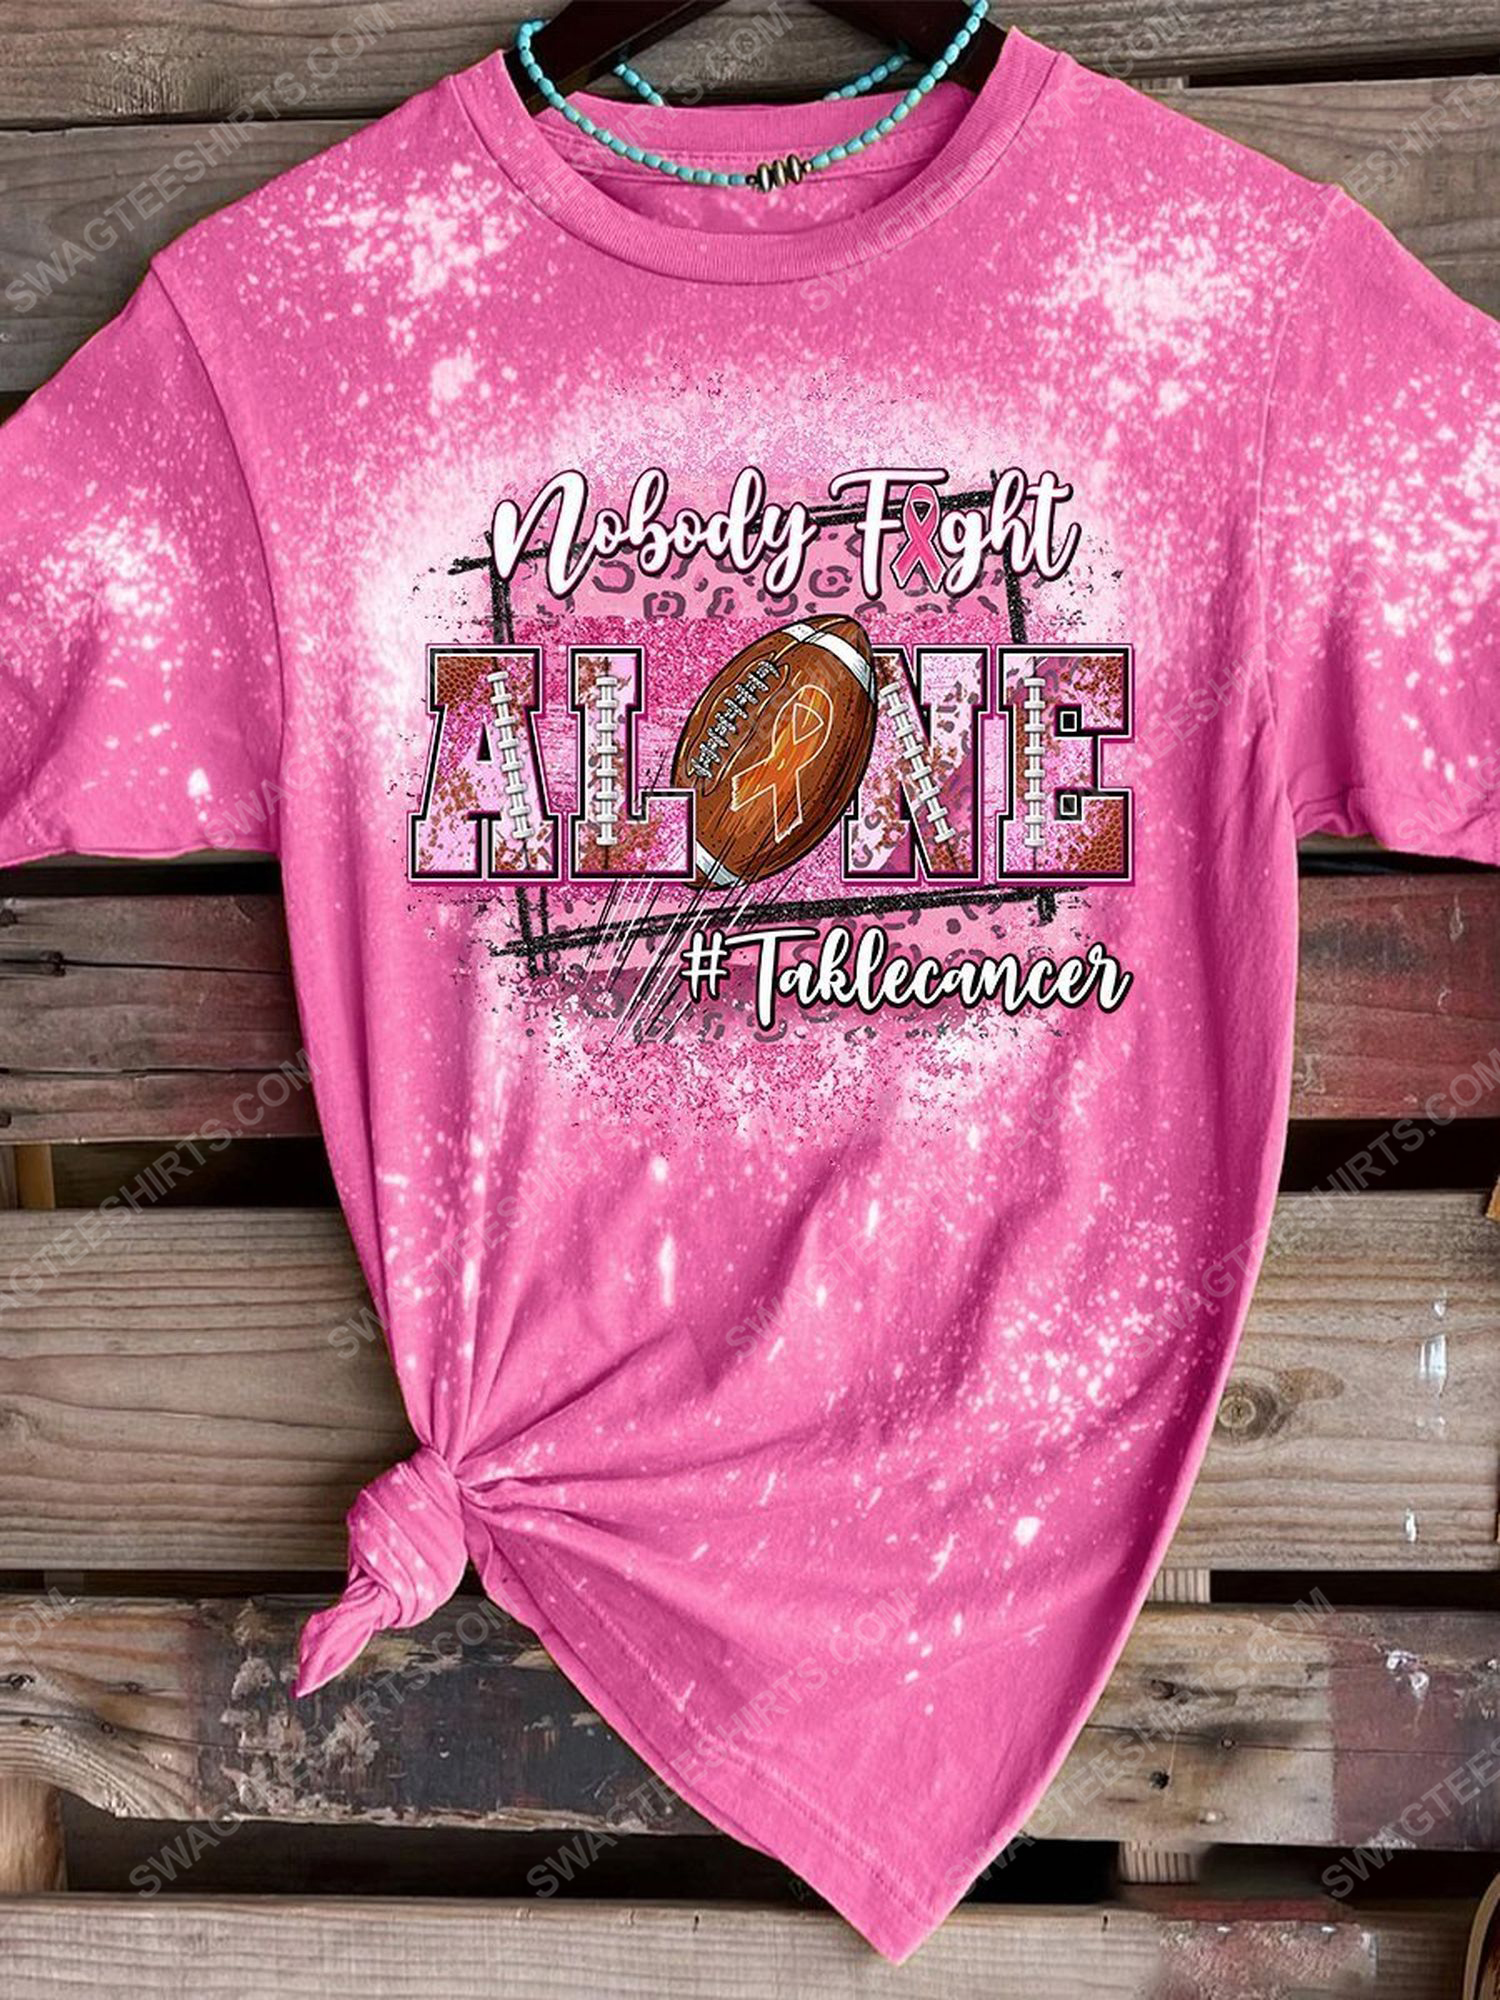 Breast cancer nobody fights alone bleached shirt 1 - Copy (3)